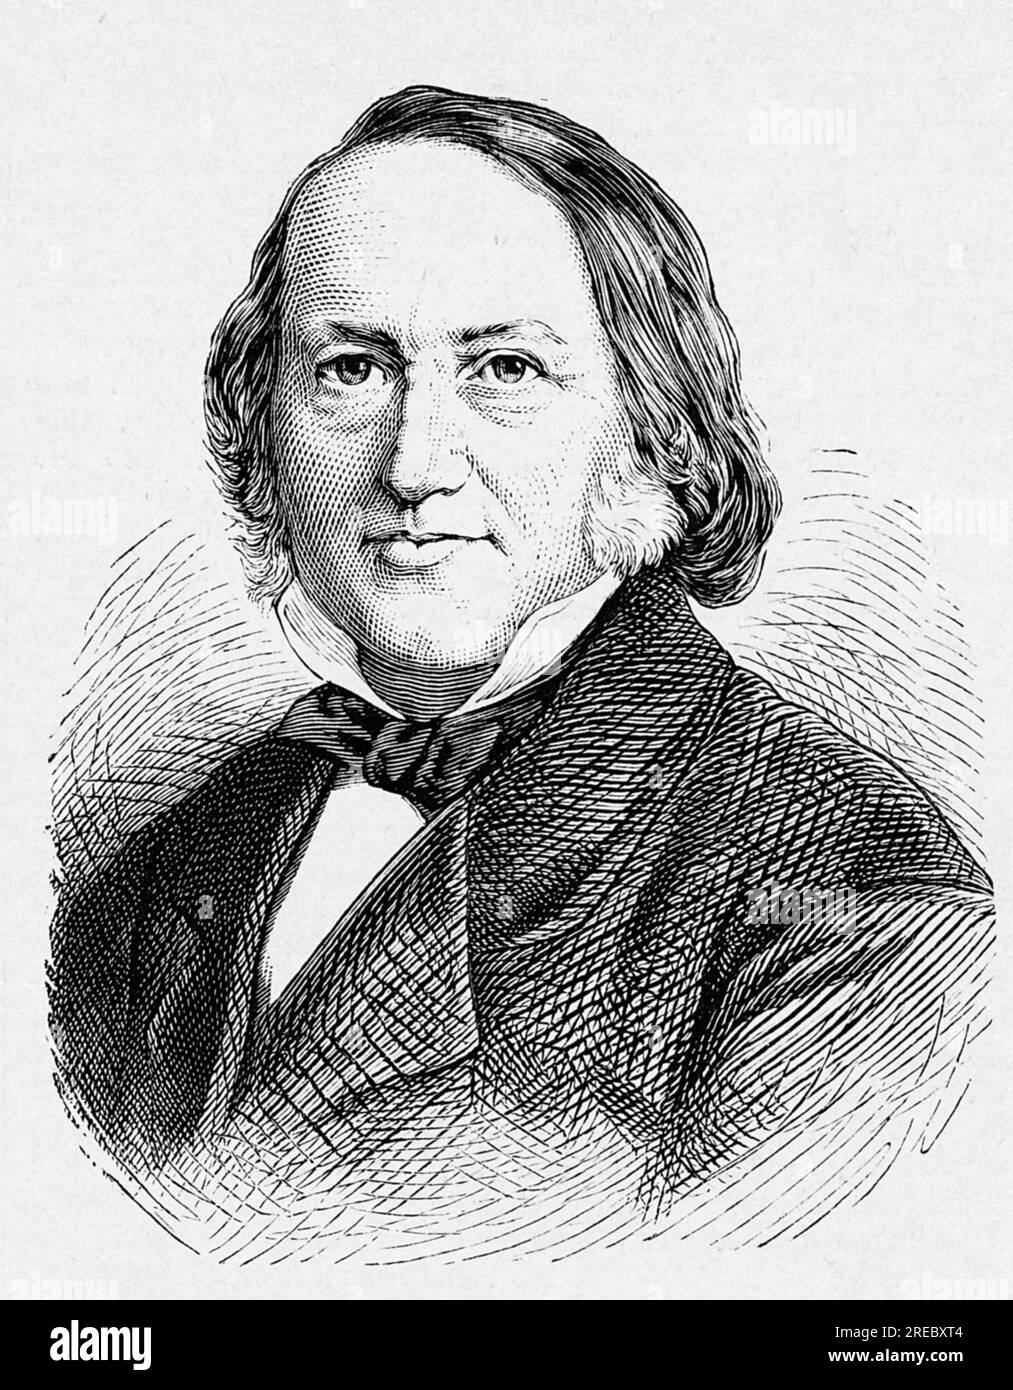 Weber, Georg, 10.2.1808 - 10.8.1888, German historian, wood engraving, circa 1870, ADDITIONAL-RIGHTS-CLEARANCE-INFO-NOT-AVAILABLE Stock Photo